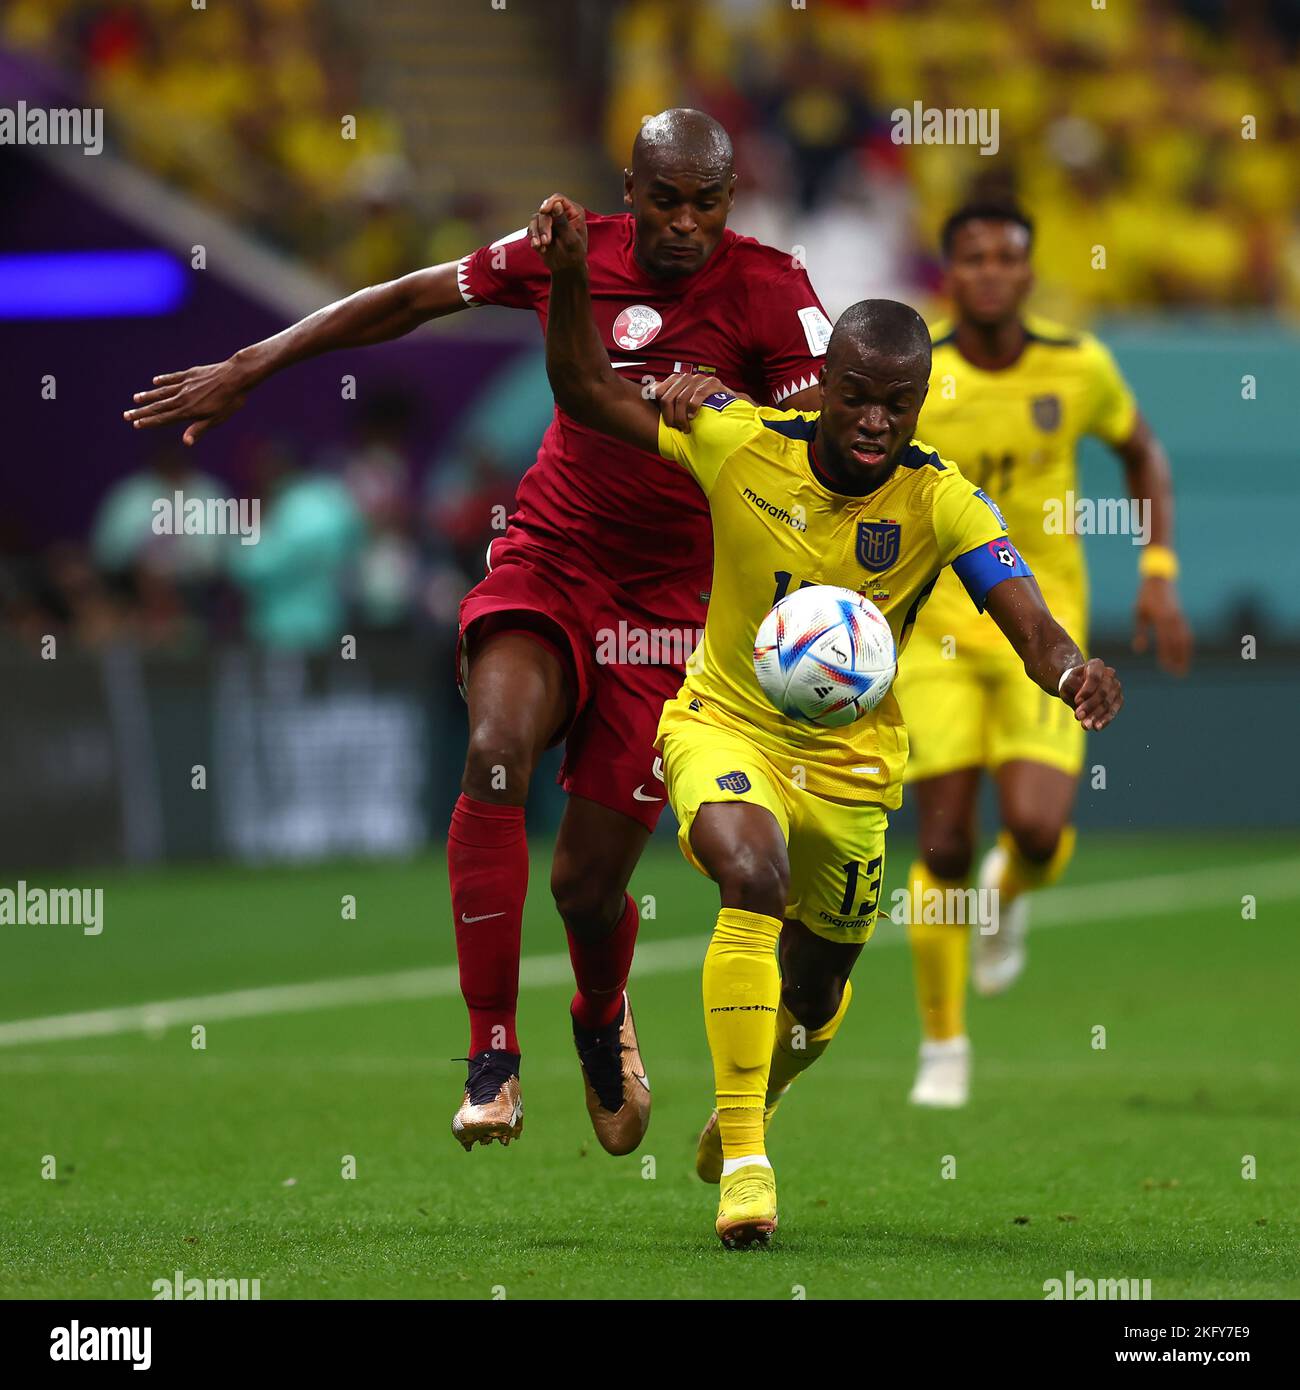 Doha, Qatar. 20th Nov, 2022. Abdelkarim Hassan (L) of Qatar in action with Enner Valencia of Ecuador during the 2022 FIFA World Cup Group A match at the Al Bayt Stadium in Doha, Qatar on November 20, 2022. Photo by Chris Brunskill/UPI Credit: UPI/Alamy Live News Stock Photo